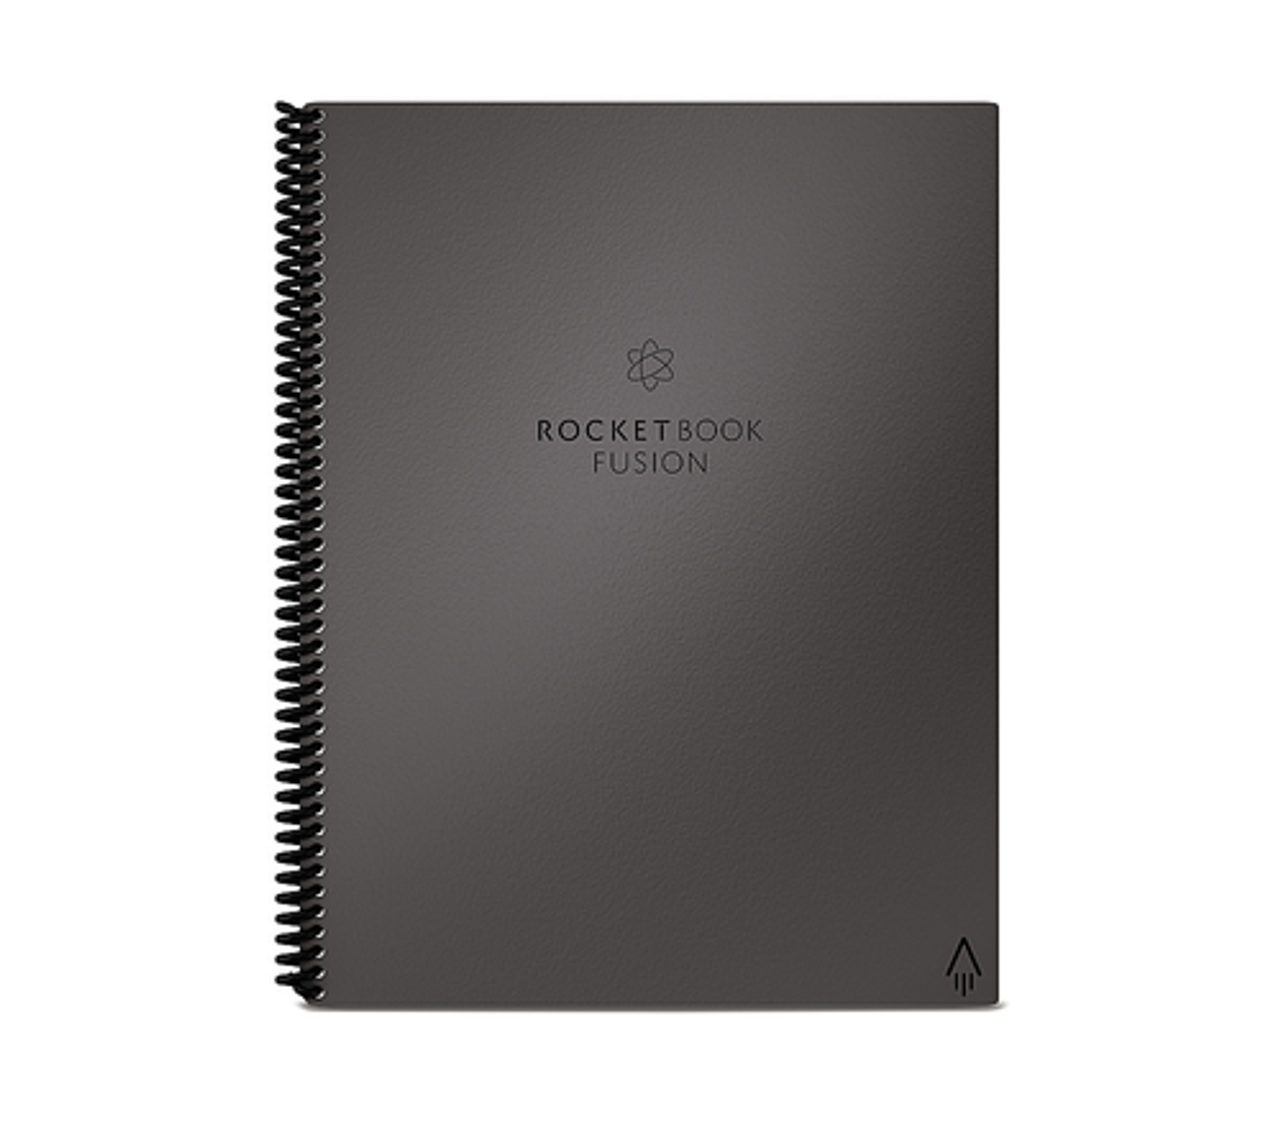 Rocketbook - Fusion Smart Reusable Notebook 7 Page Styles 8.5" x 11" - Deep Space Gray - Deep Space Gray